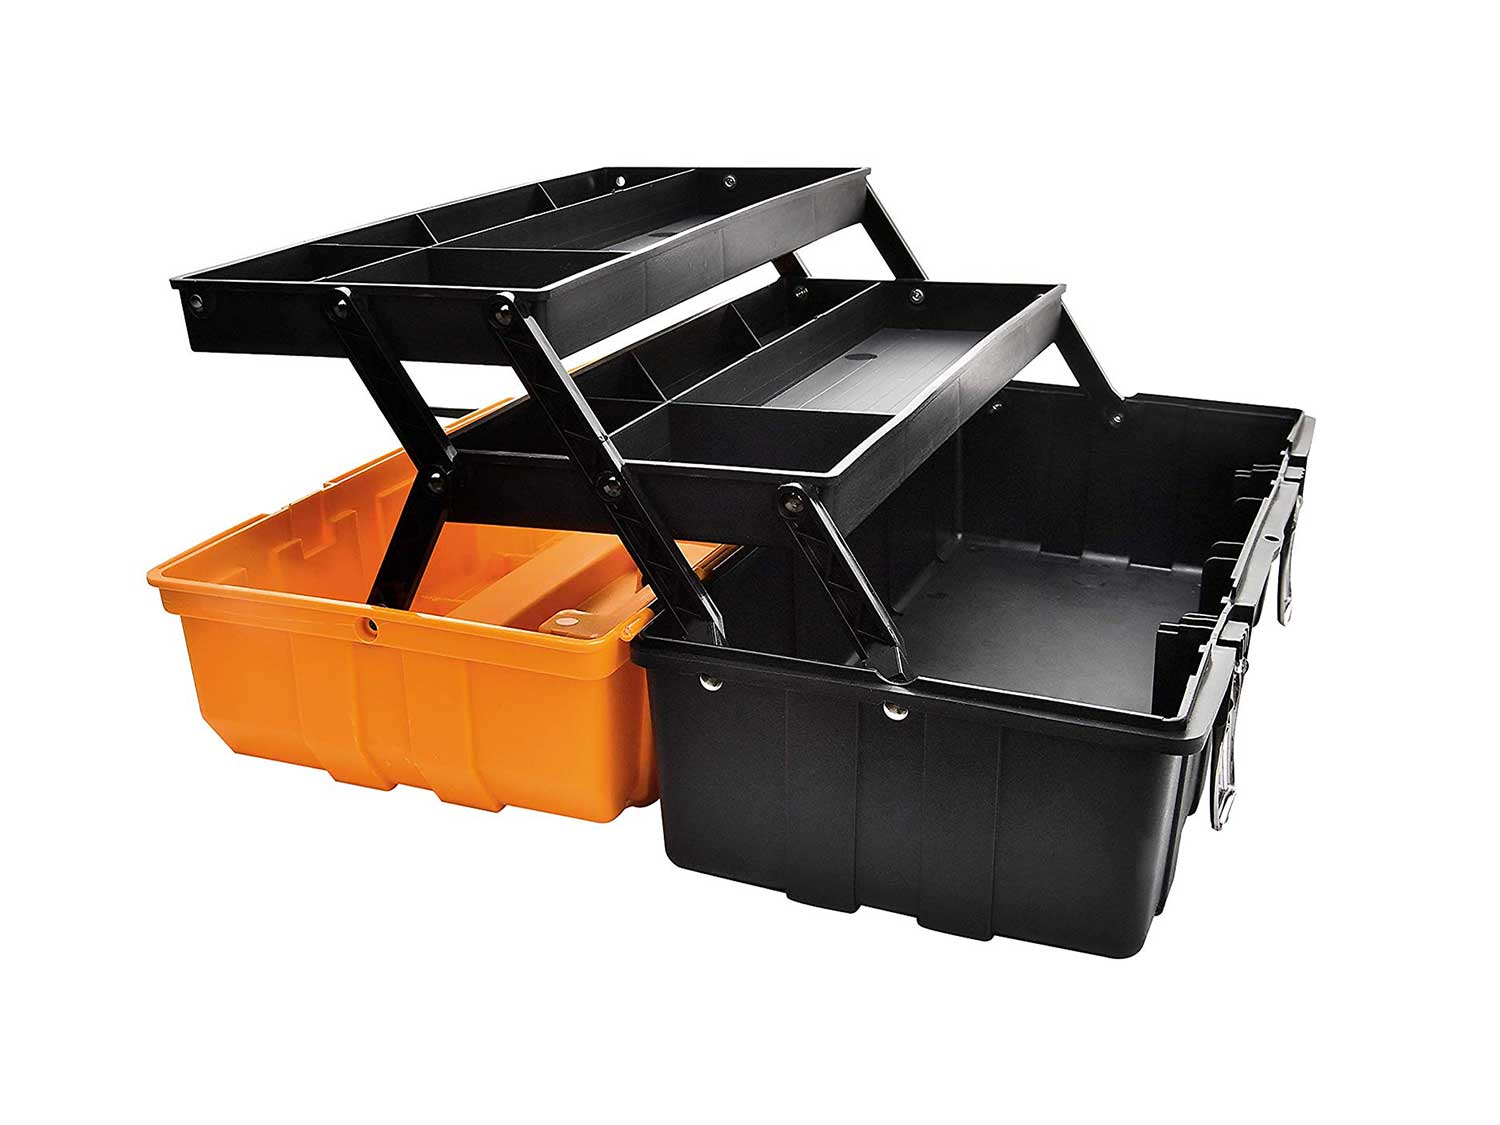 17-Inch Multi-Purpose 3-Layer Toolbox With Tray And Dividers, Household Plastic Tool Organizers, Orange Folding Storage Box